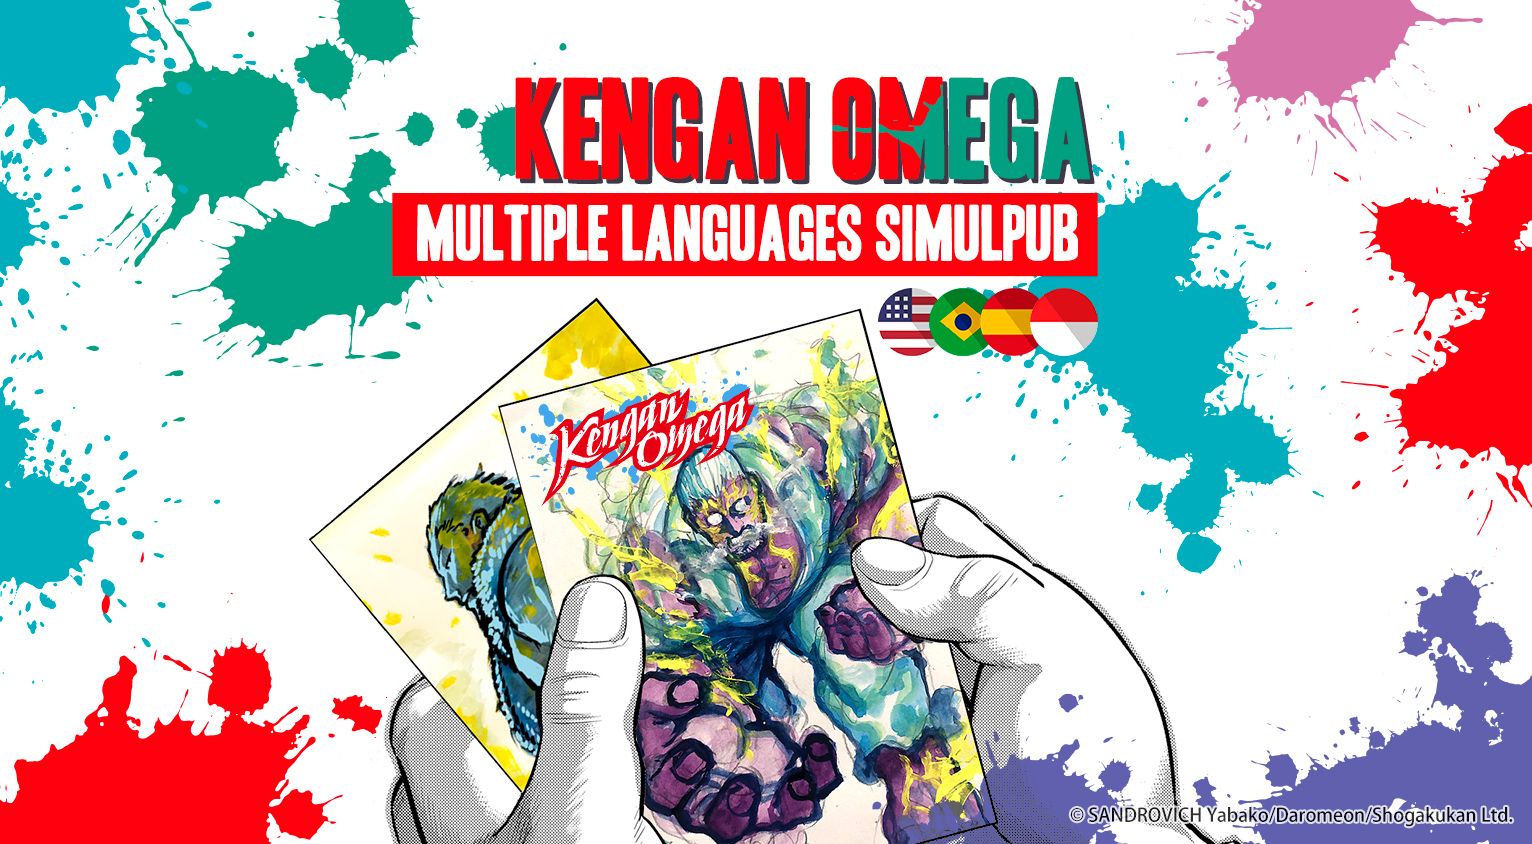 Kengan Omega Gets Spanish, Portuguese, and Bahasa Indonesian Releases Through Comikey Media Inc.